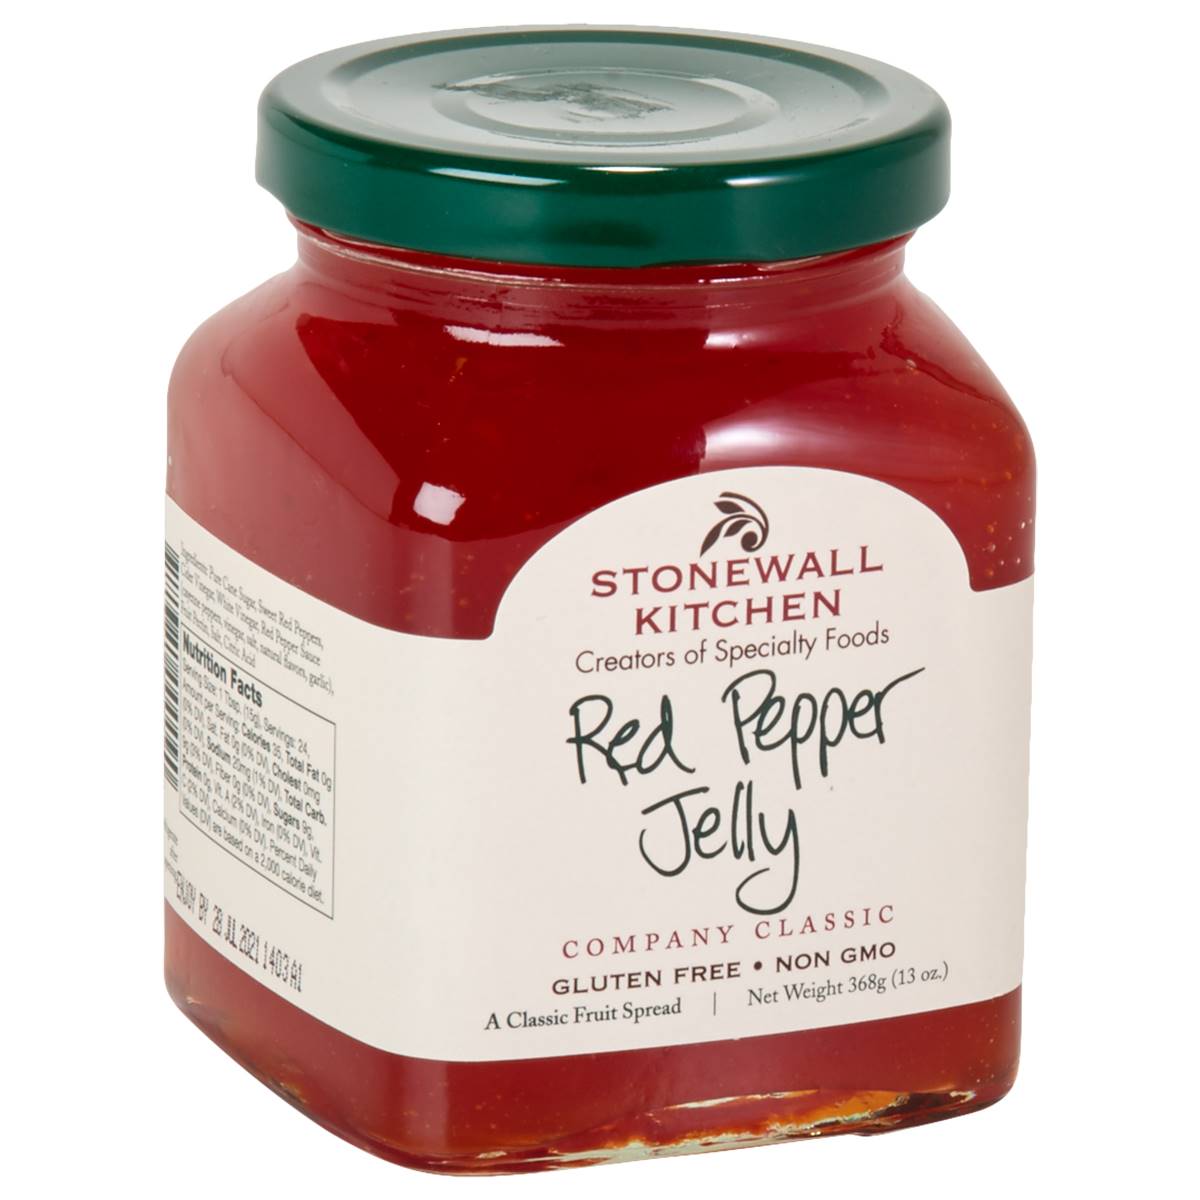 Stonewall Kitchen 13oz. Red Pepper Jelly